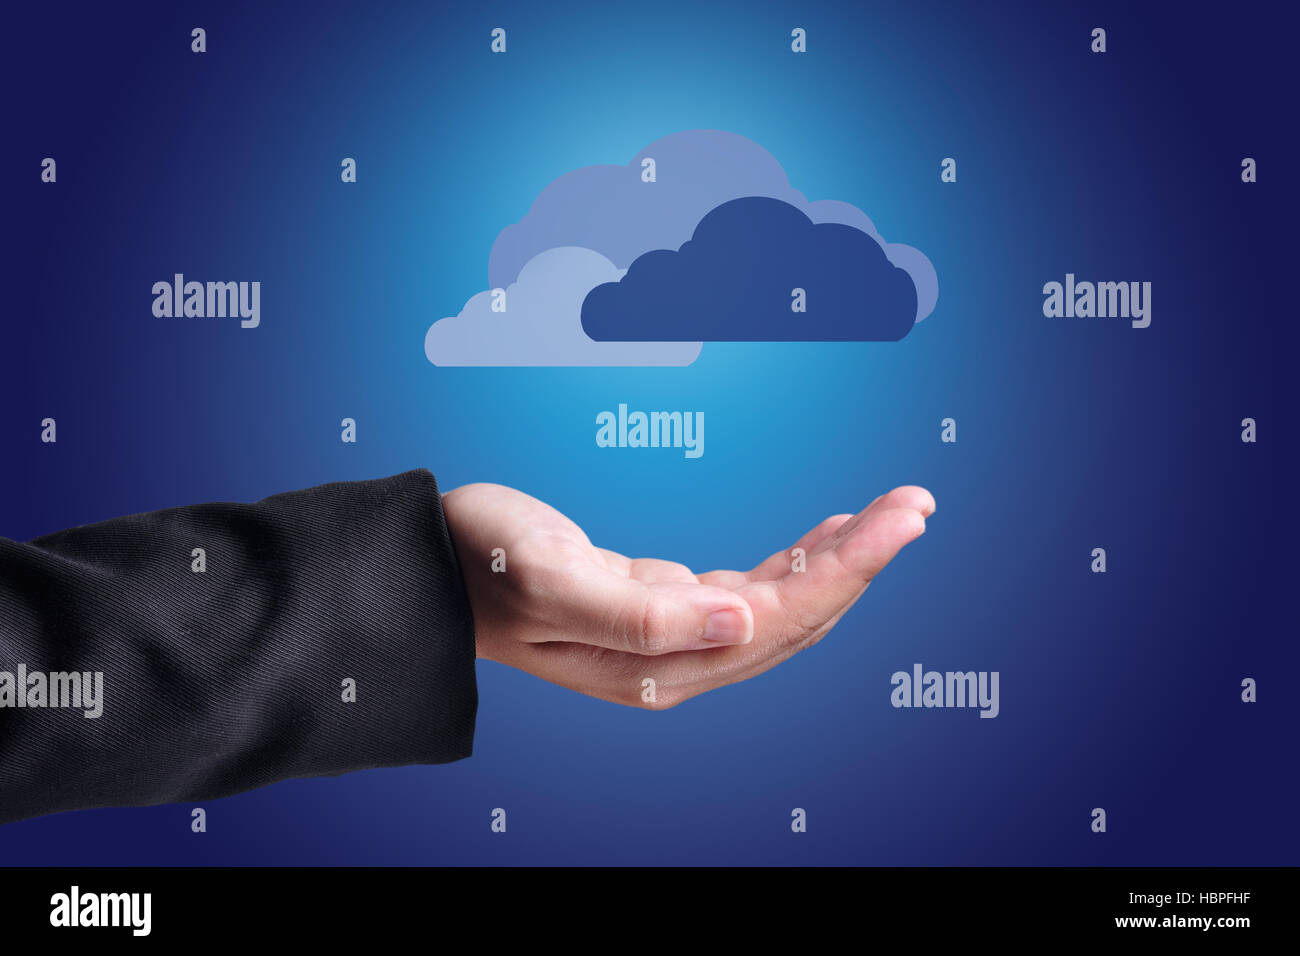 Clouds Above Hands. Cloud Computing Concept. Stock Photo